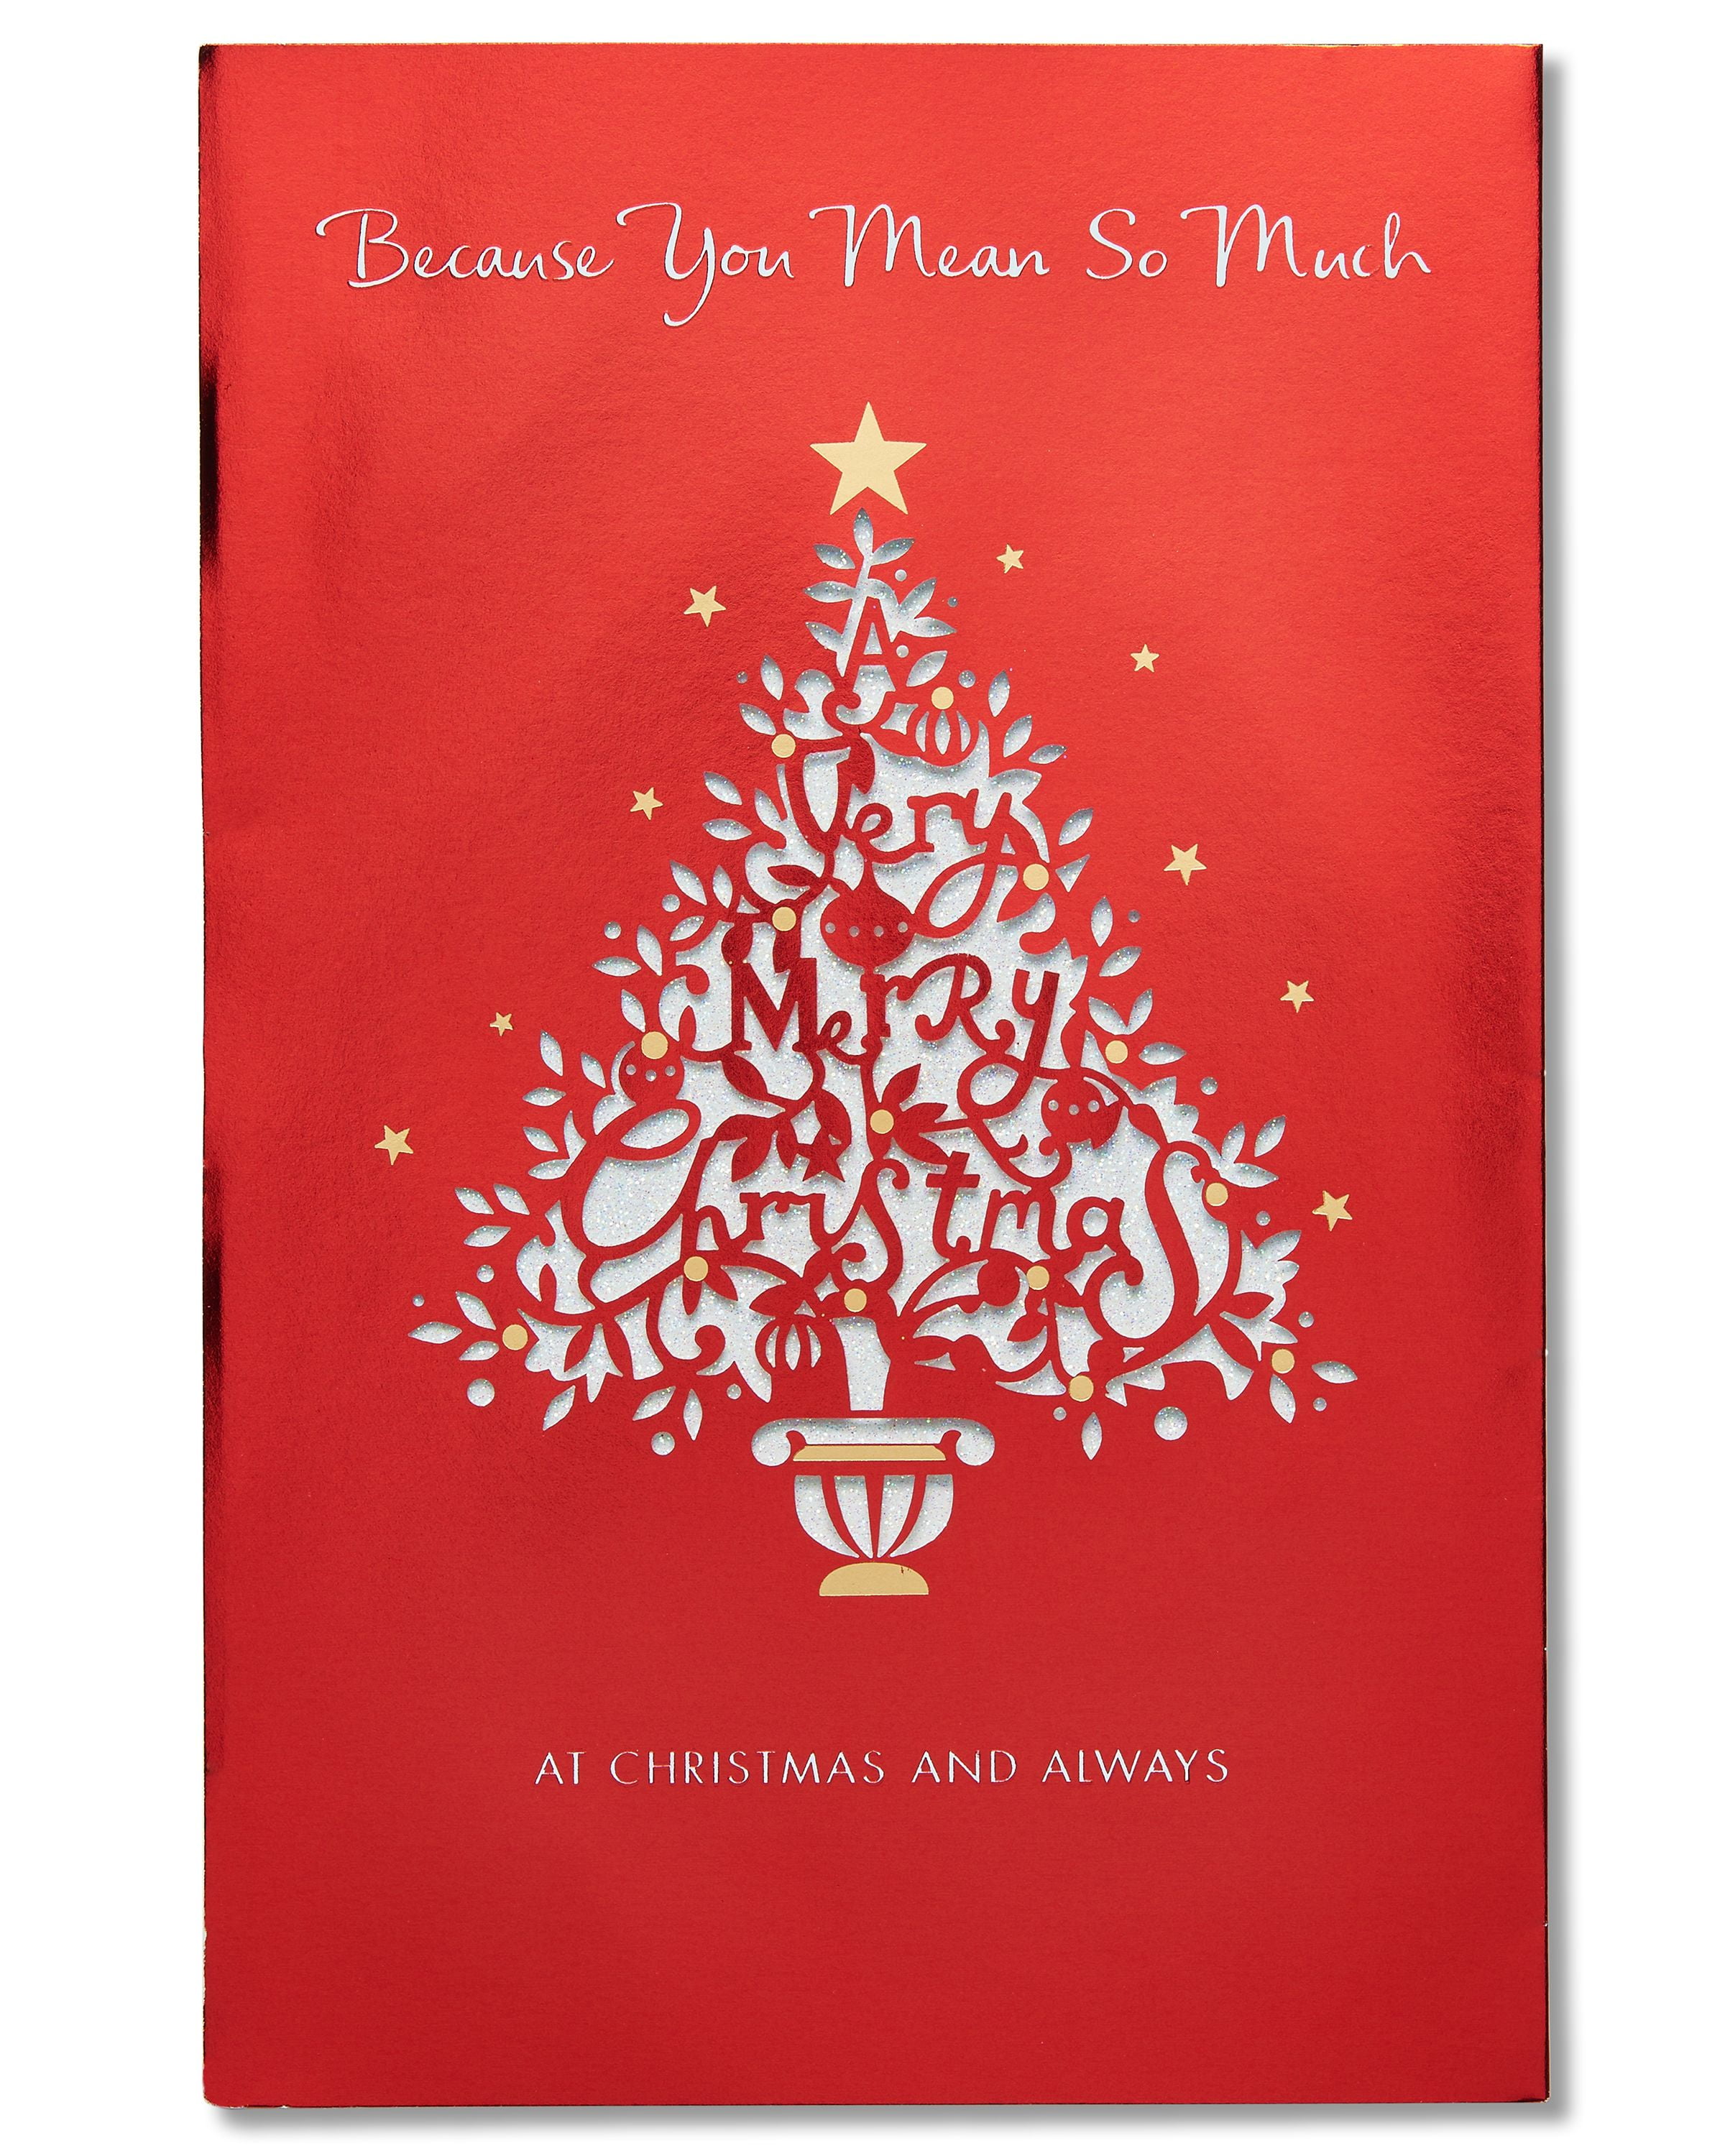 Details about   CHRISTMAS CARDS BOXED NEW AMERICAN GREETINGS GLITTERED 